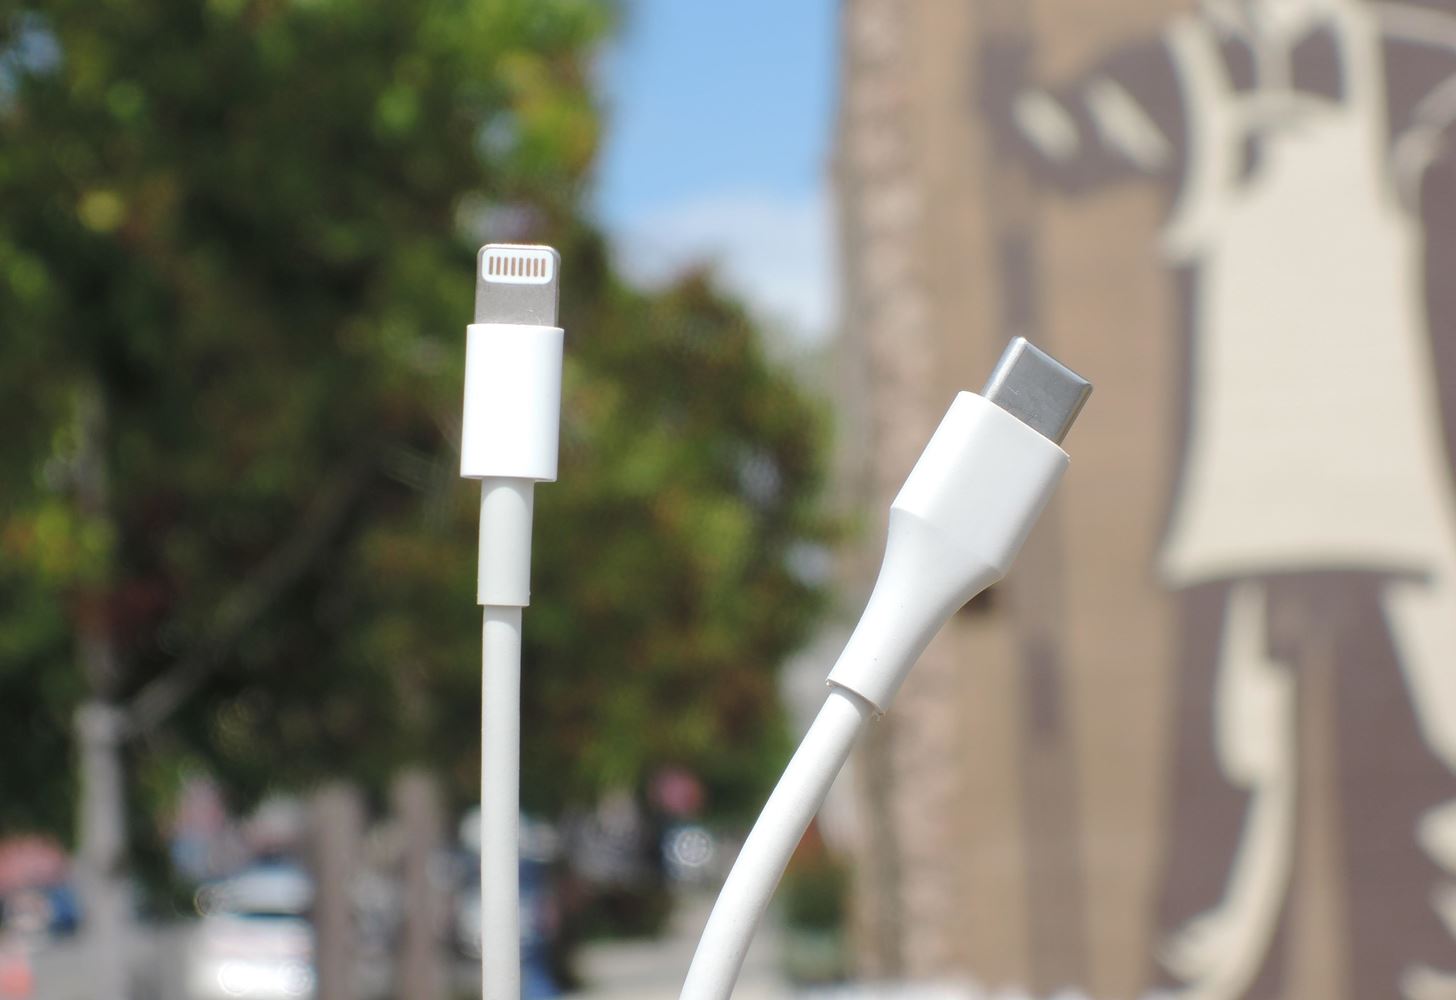 Why the iPhone X Needs a $25 USB Type-C Cable to Fast Charge